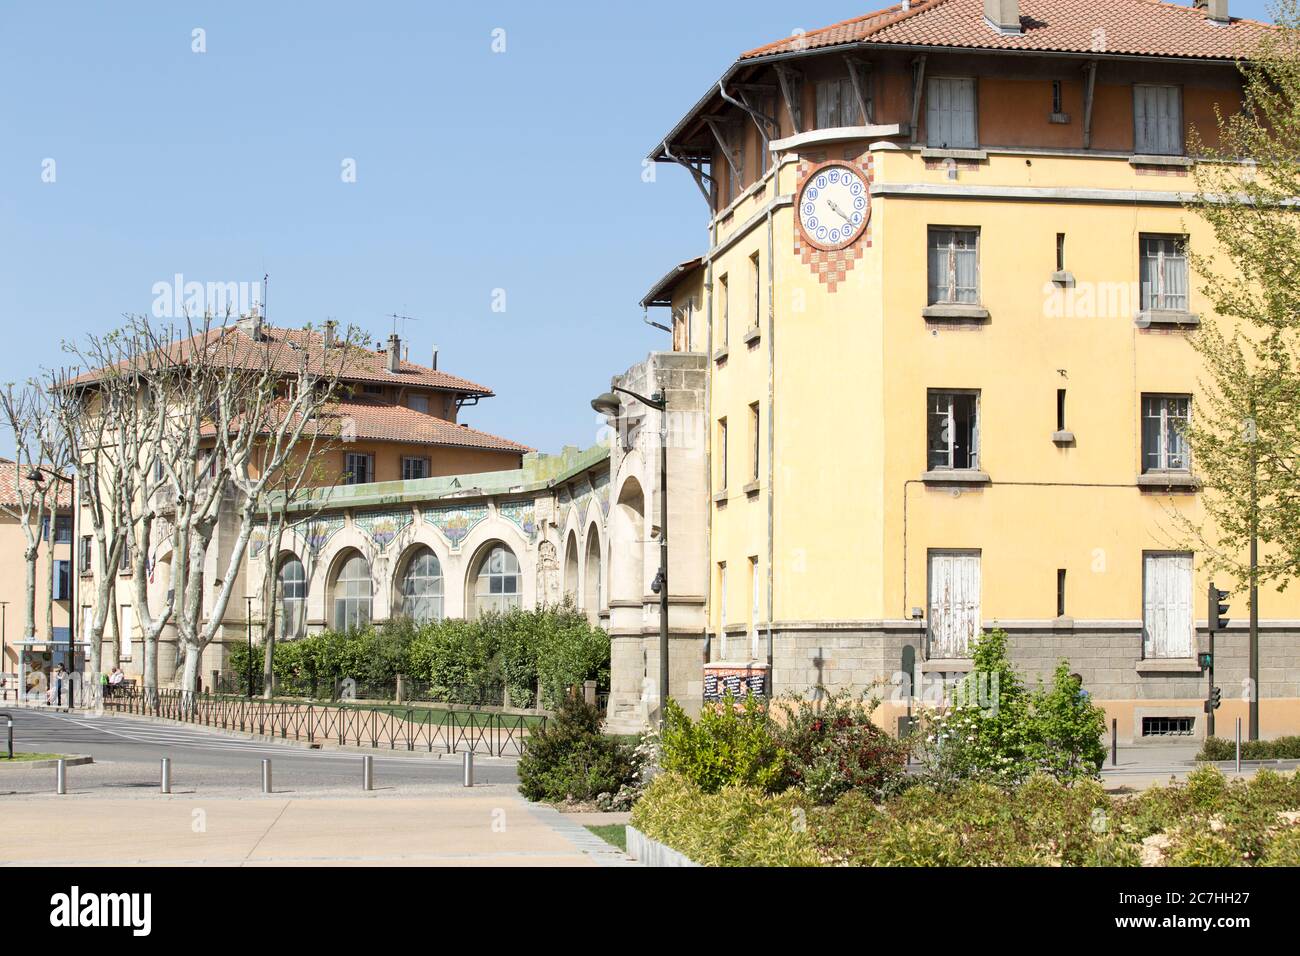 France School Building High Resolution Stock Photography and Images - Alamy